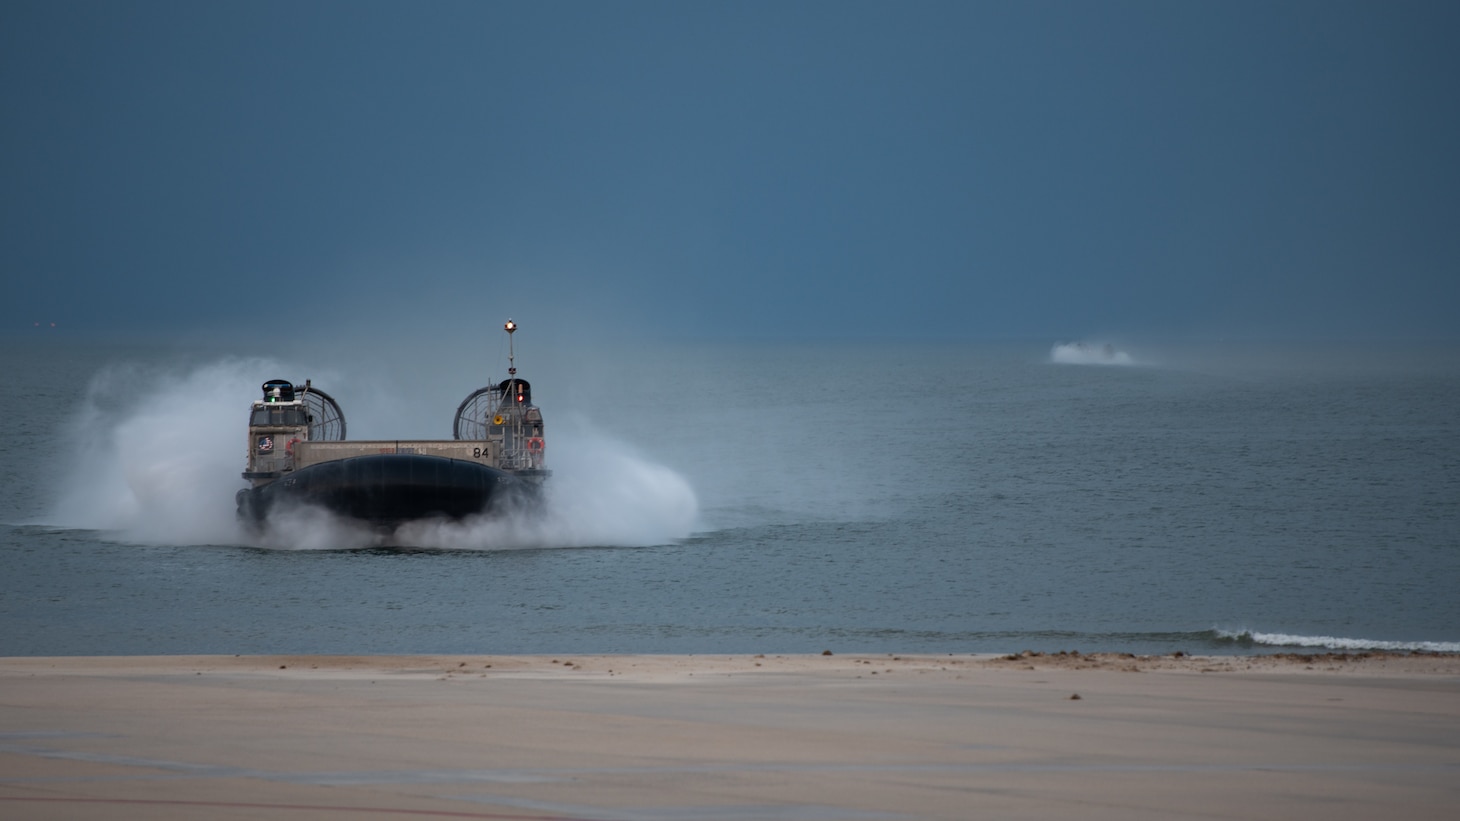 An LCAC on the water approaching the camera.